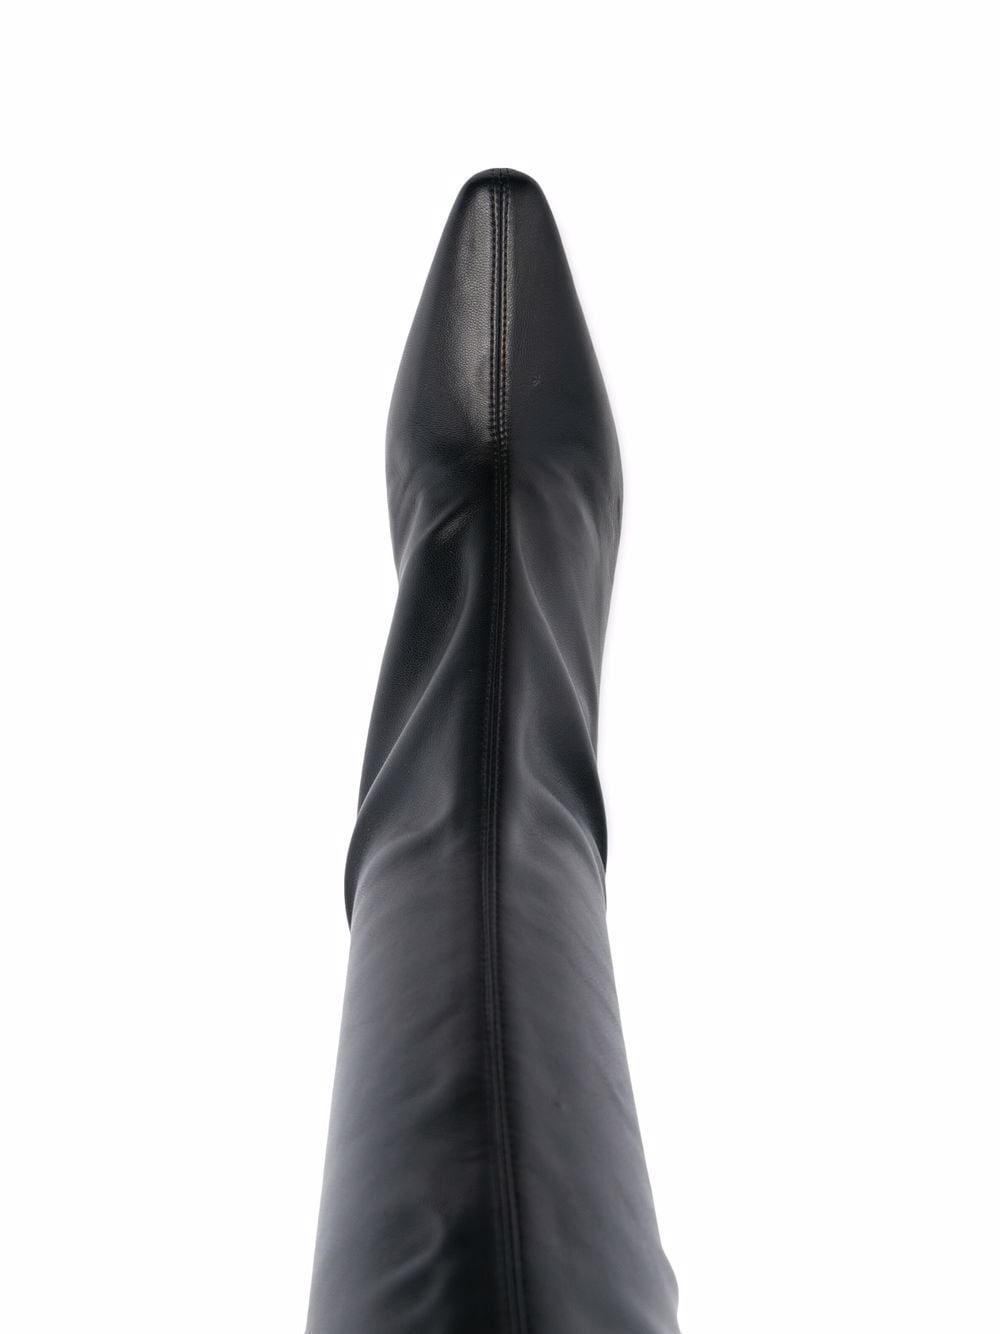 GIABORGHINI Rosie 8 100mm Leather knee-high Boots - Farfetch